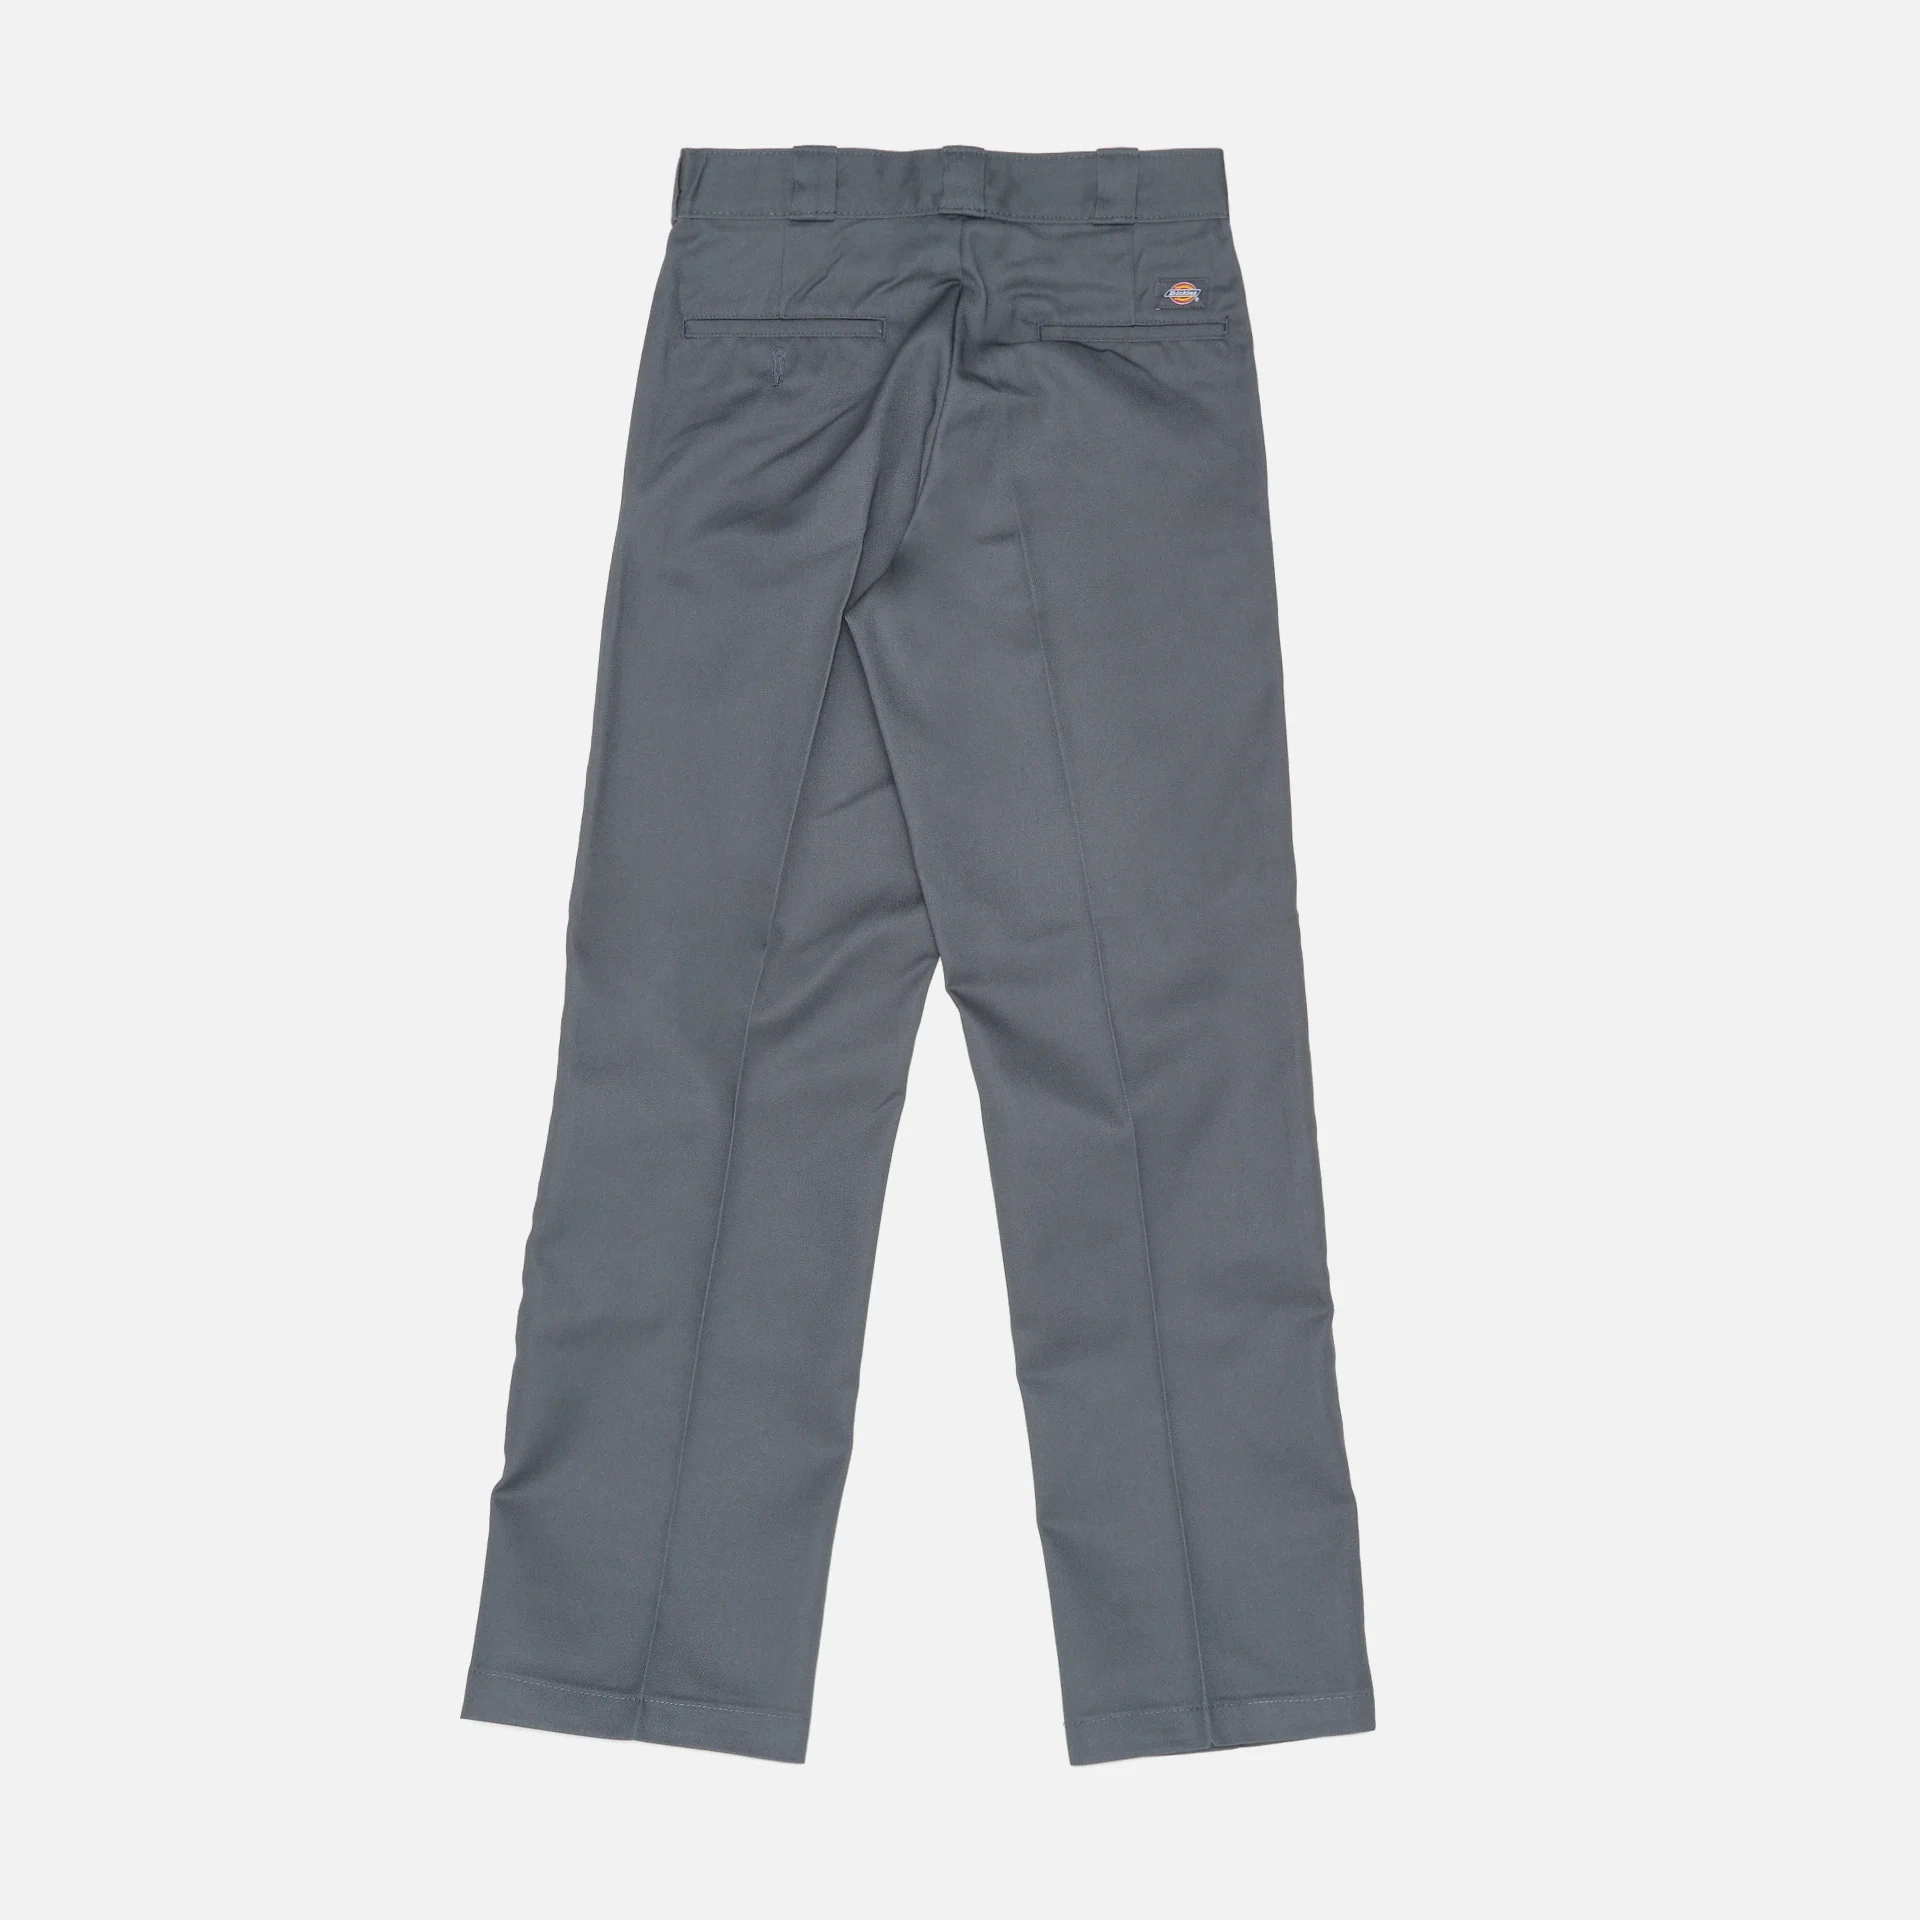 Dickies 874 Recycled Workwear Chino Charcoal Grey